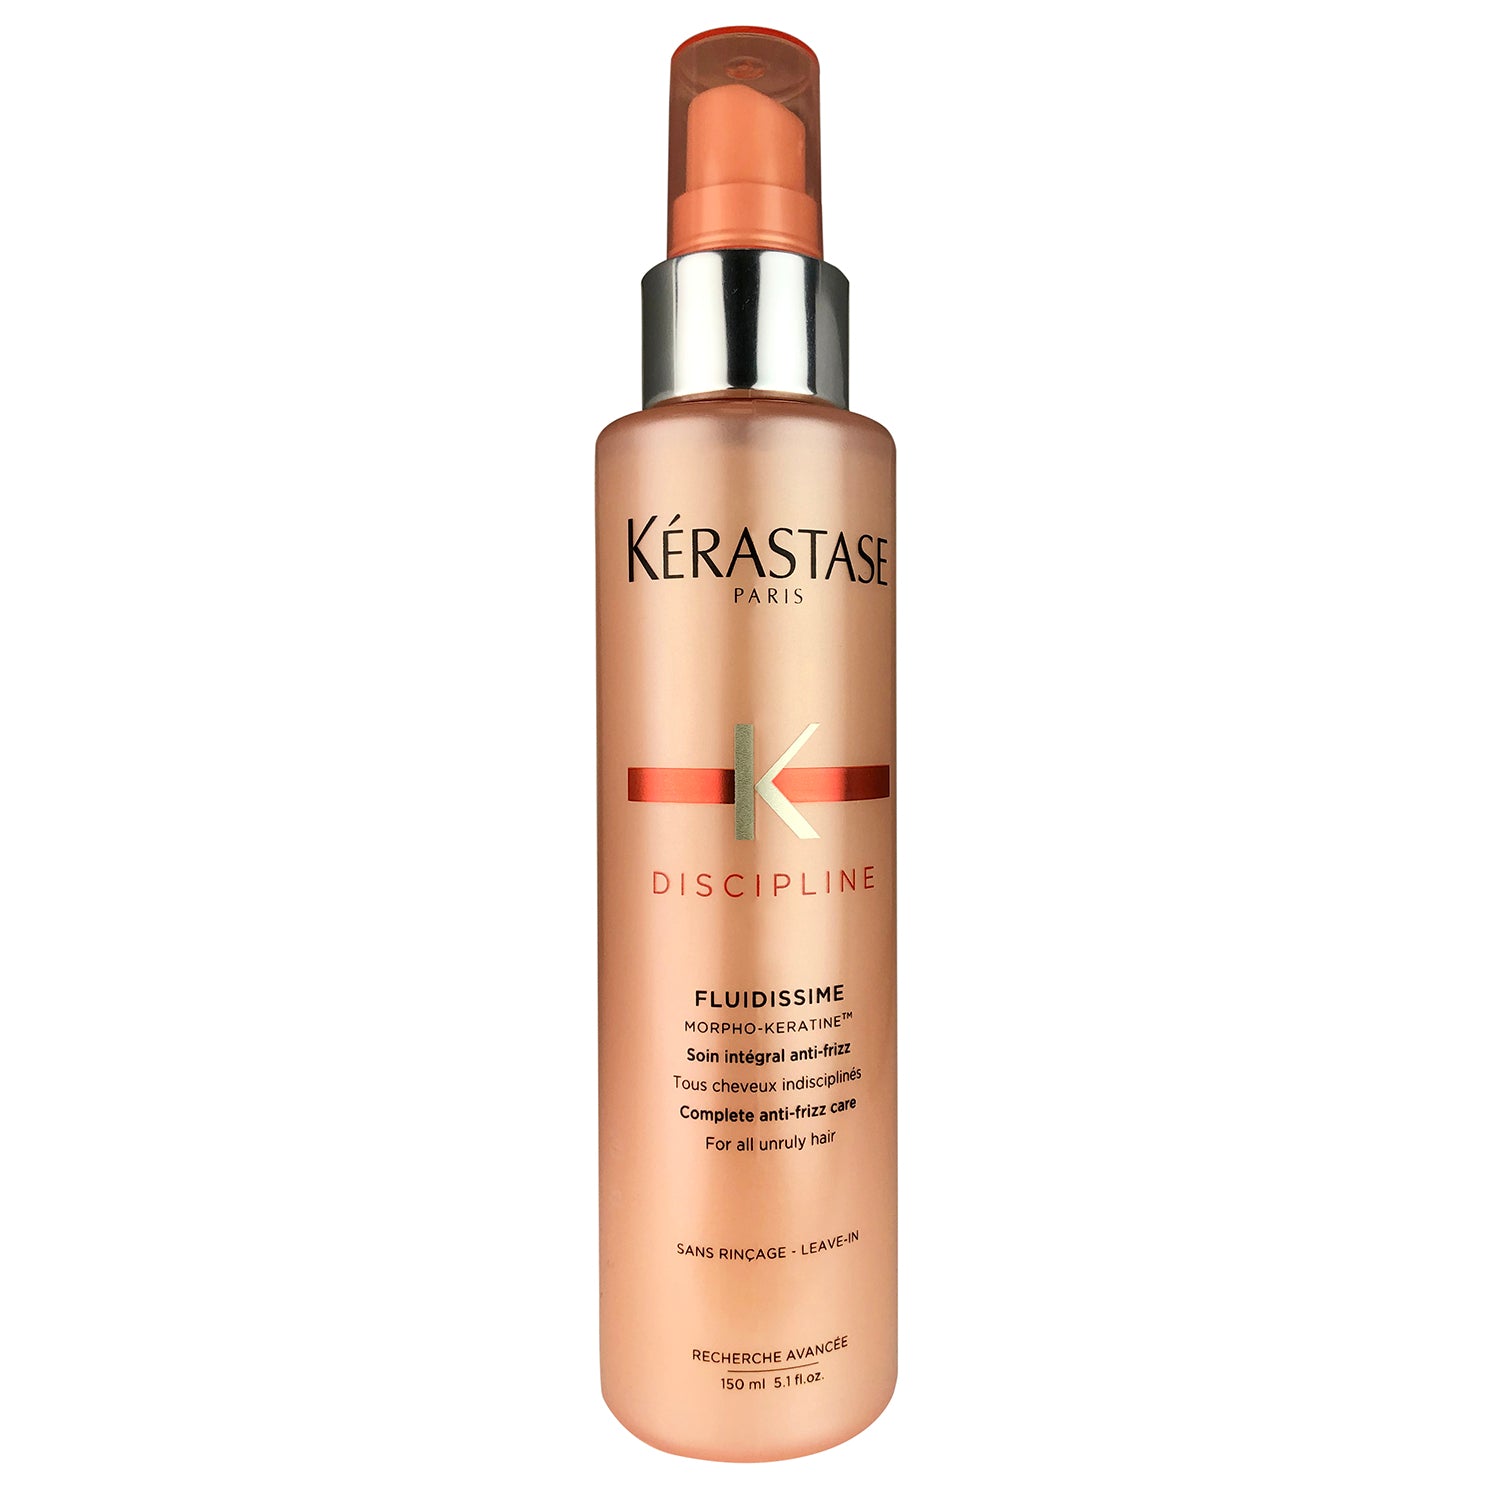 Kerastase Discipline Complete Anti-Frizz Leave-in Spray Care For All Unruly Hair 5.1 oz